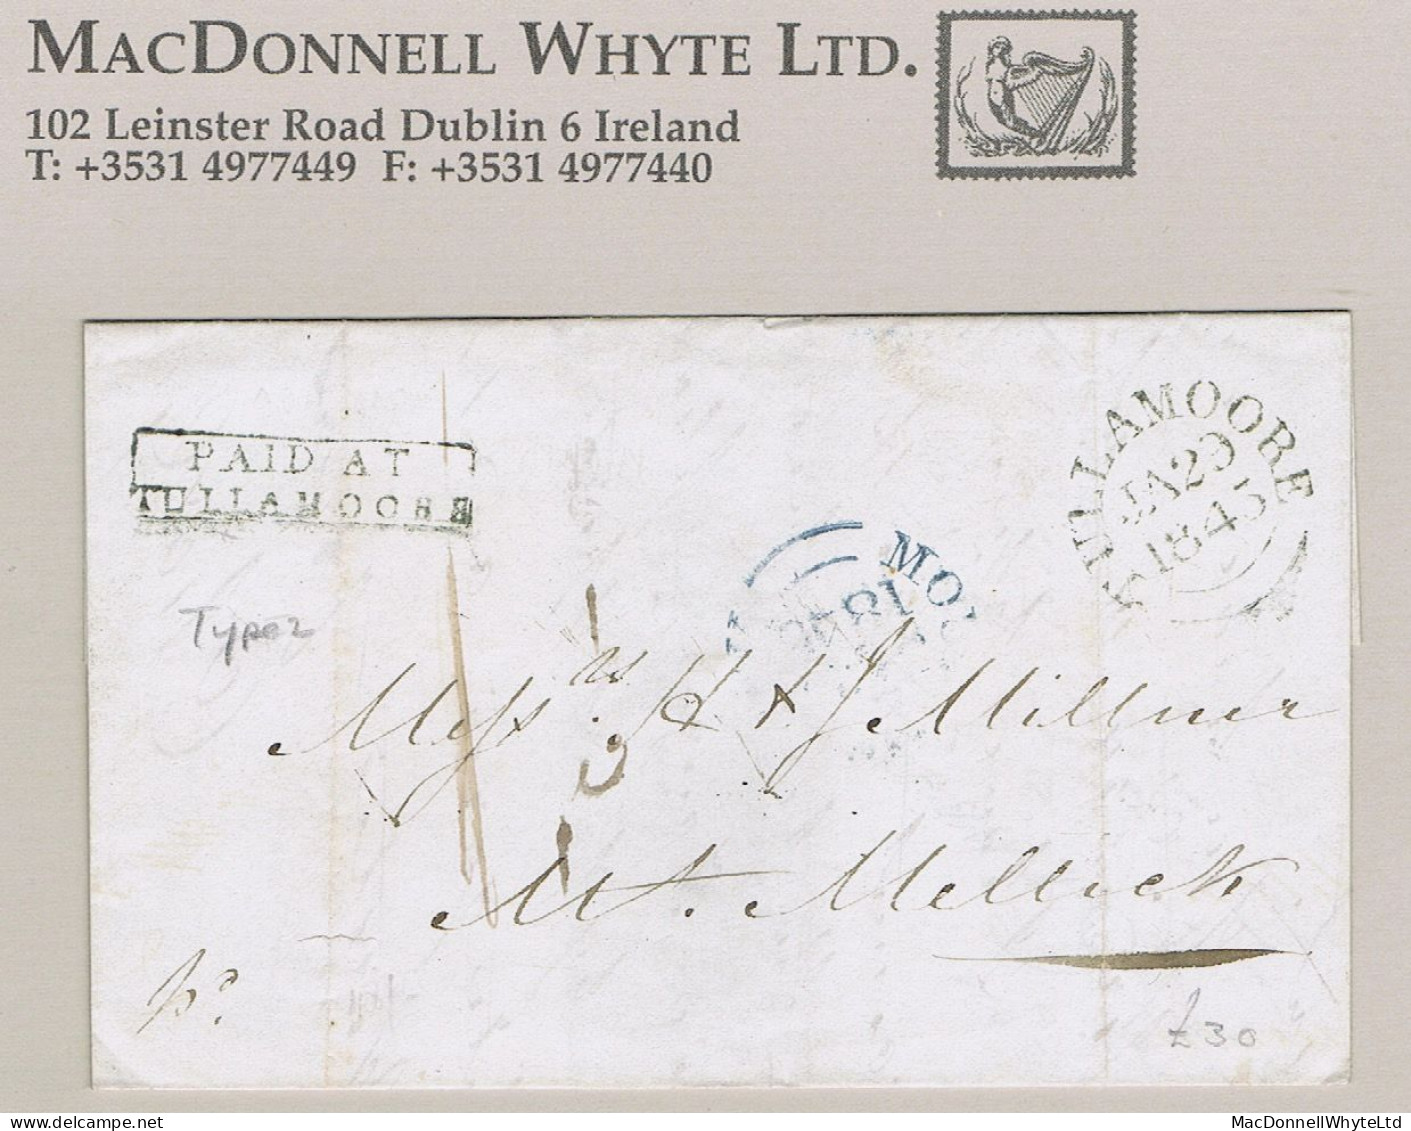 Ireland Offaly Uniform Penny Post 1845 Cover To Mountmellick With Boxed PAID AT/TULLAMOORE, TULLAMOORE JA 29 1845 - Voorfilatelie